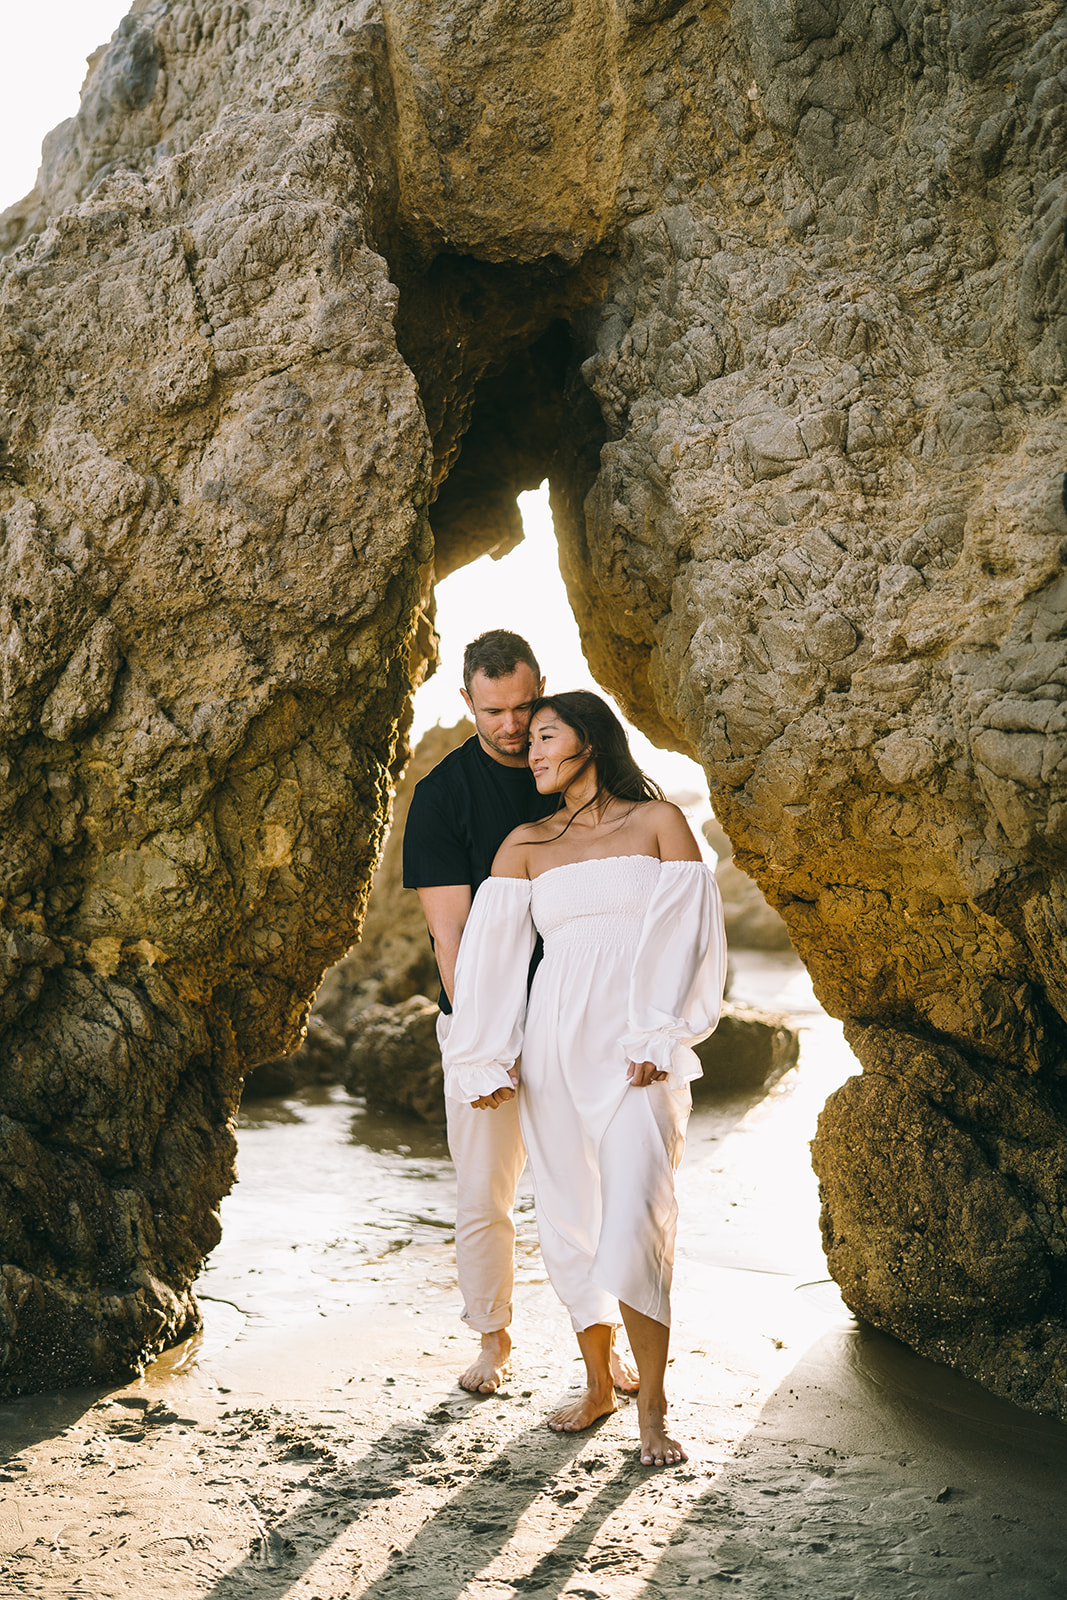 Man and woman standing close together in a rock arch on Malibu beach